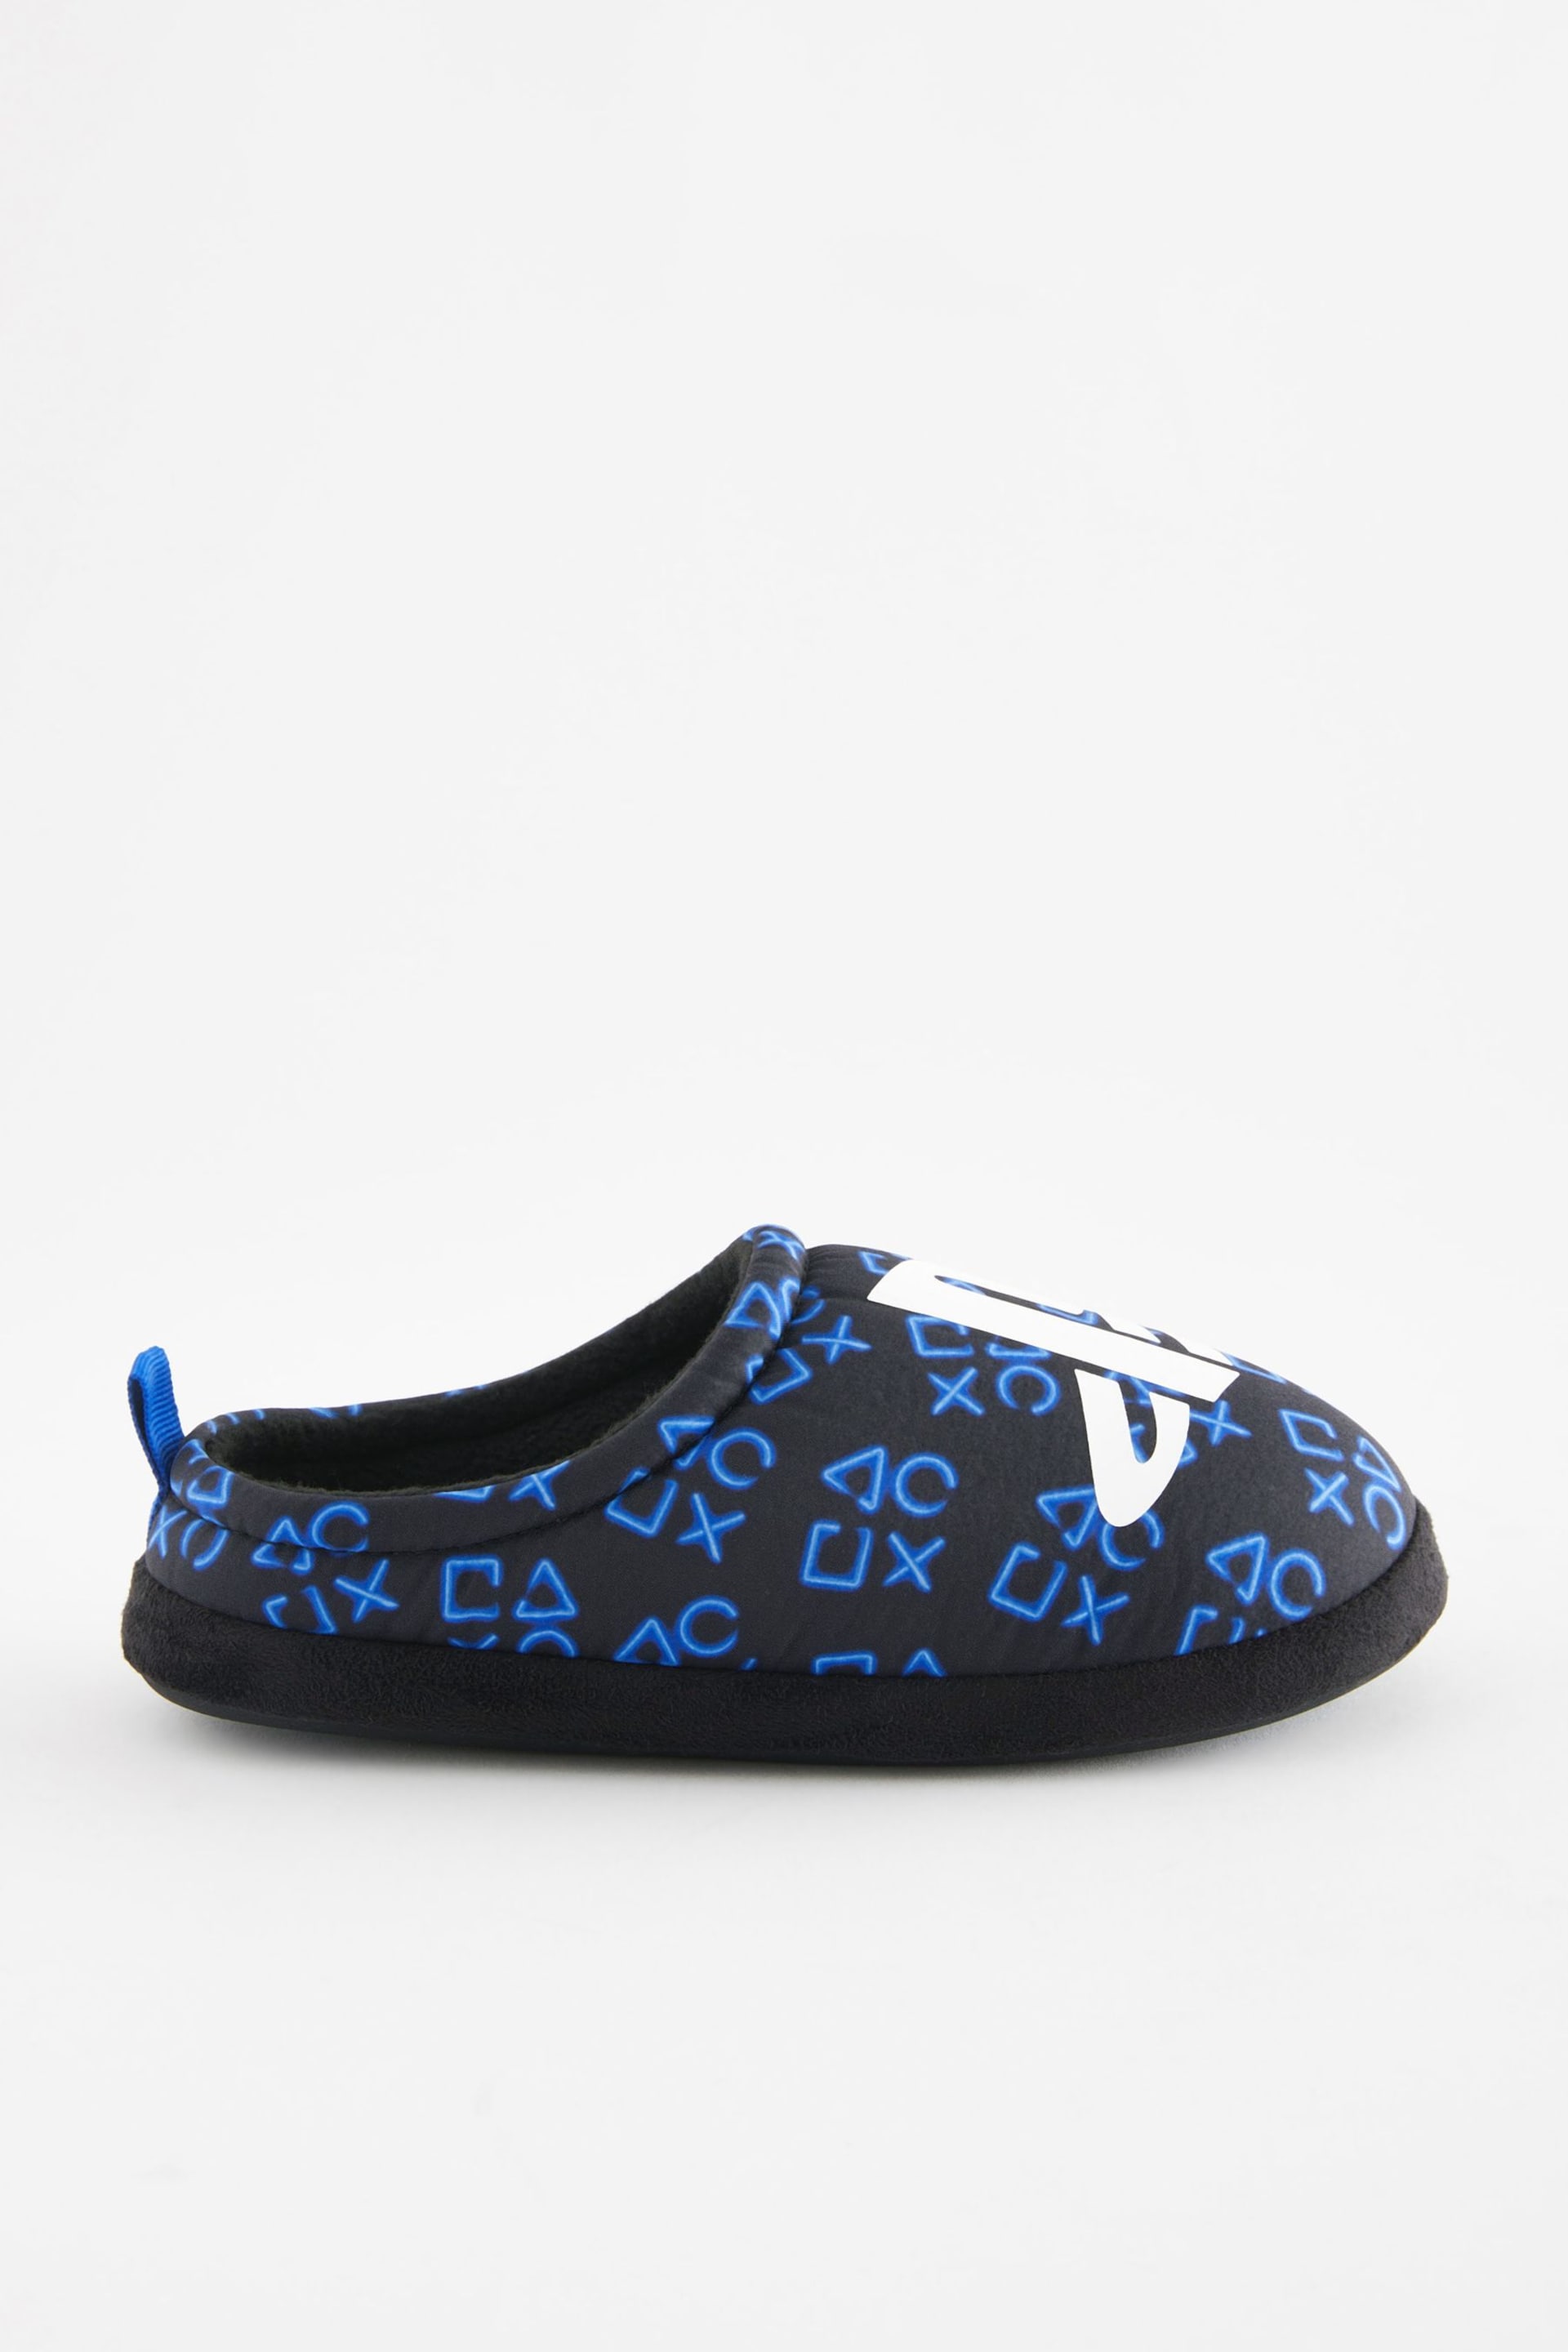 Black PlayStation Sporty Mule Slippers - Image 3 of 4